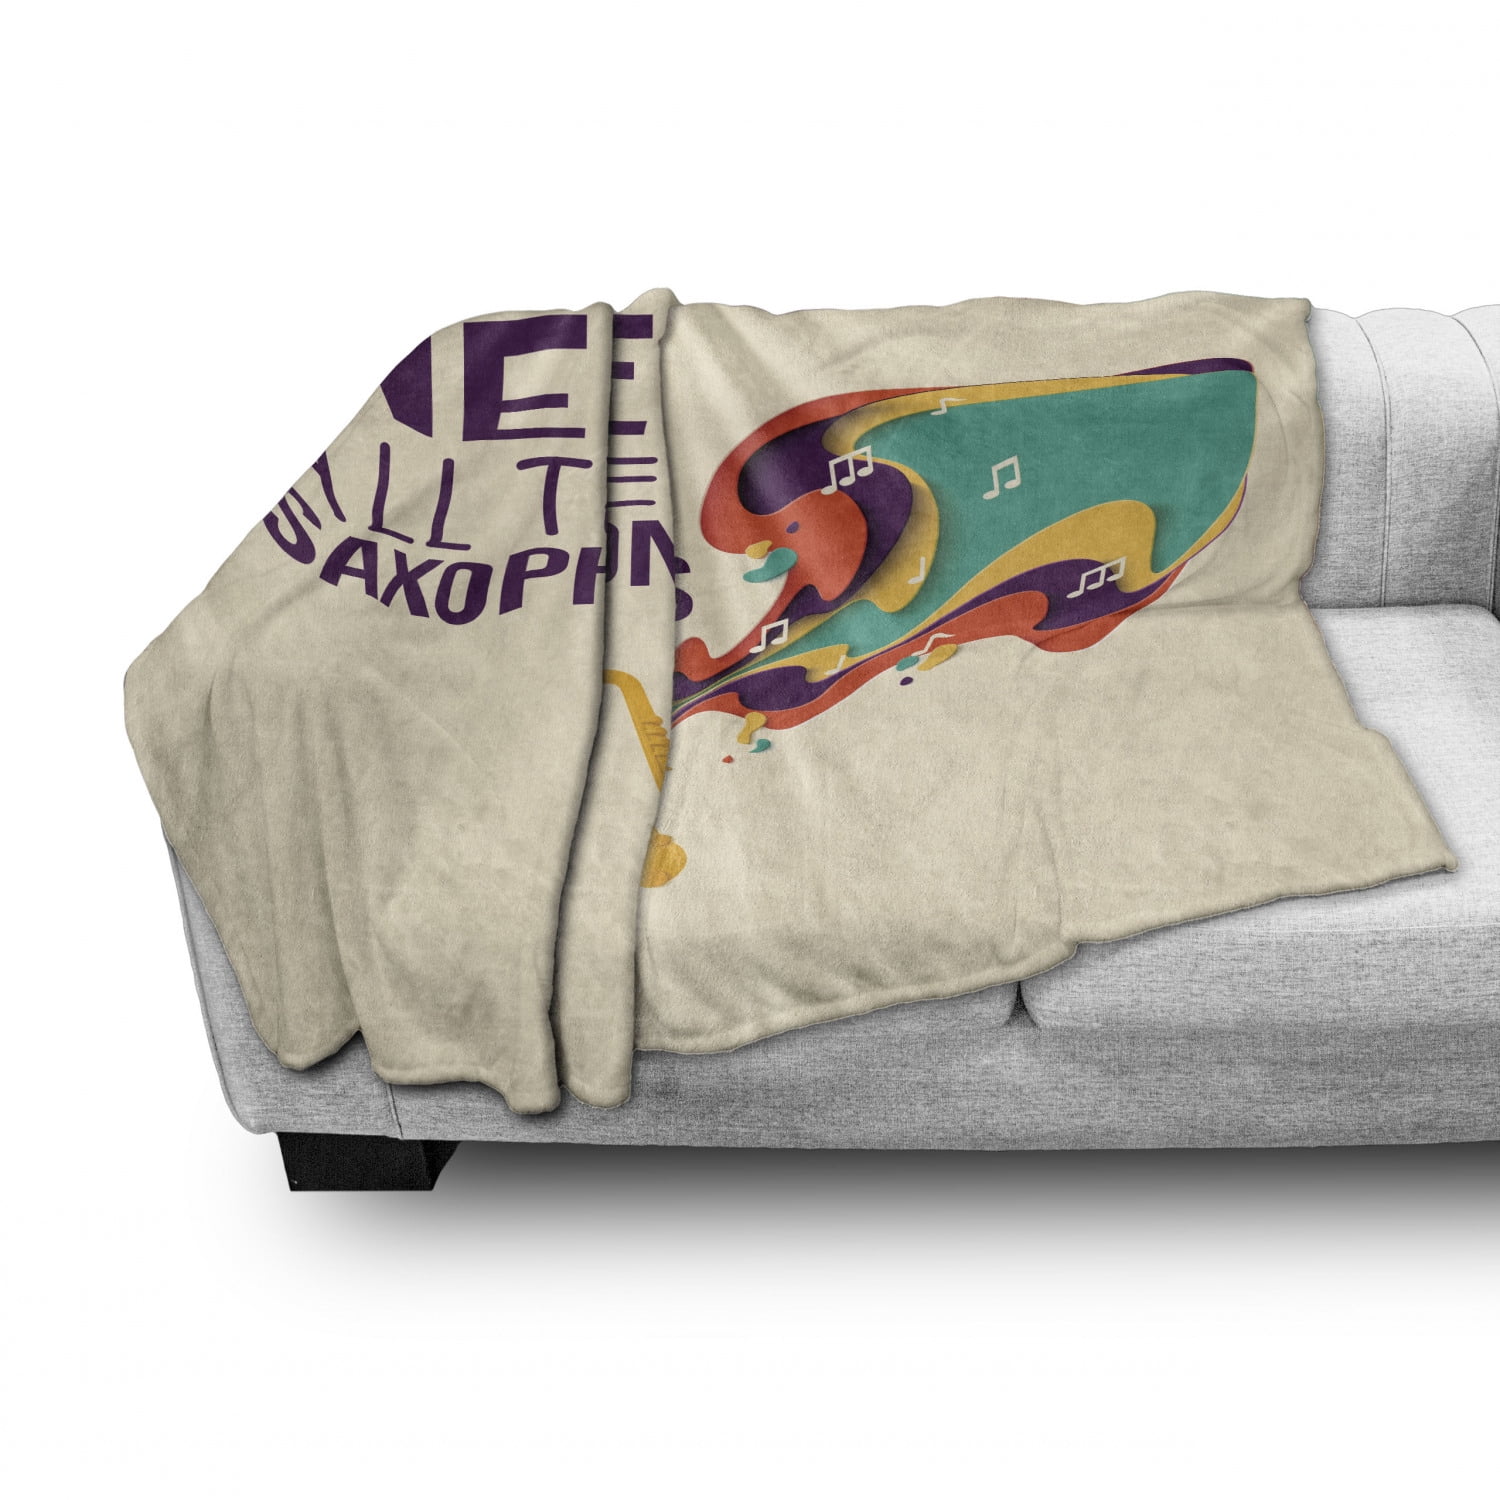 Cozy Plush for Indoor and Outdoor Use Champagne Plum Ambesonne Saying Soft Flannel Fleece Throw Blanket 50 x 70 Yes I Really Do Need All These Saxophones Loose Yourself into The Rhythm Artwork